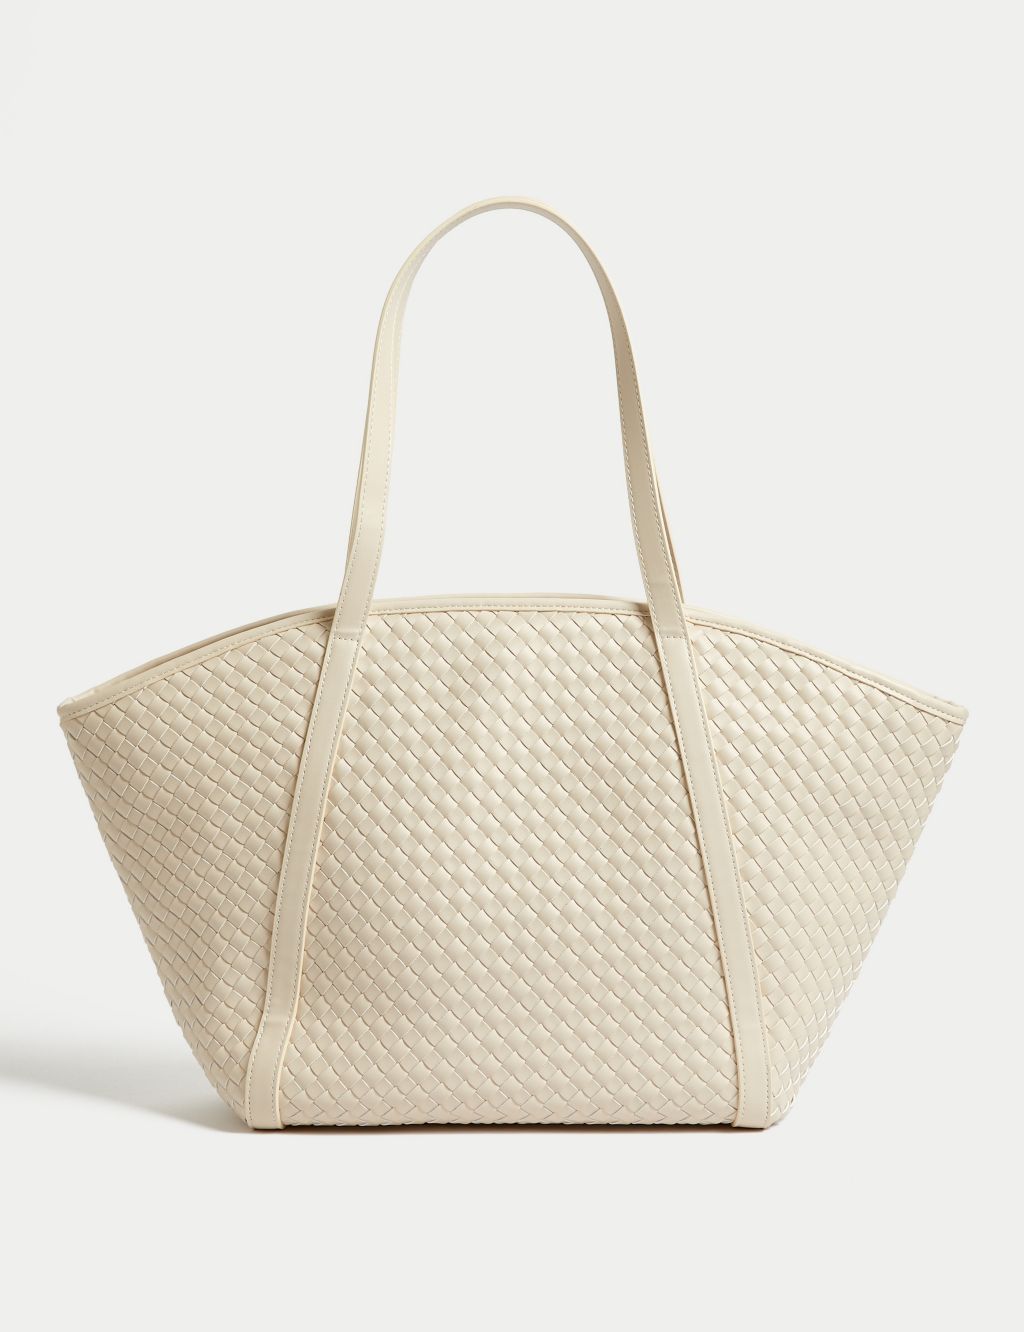 Faux Leather Woven Tote Shopper image 3